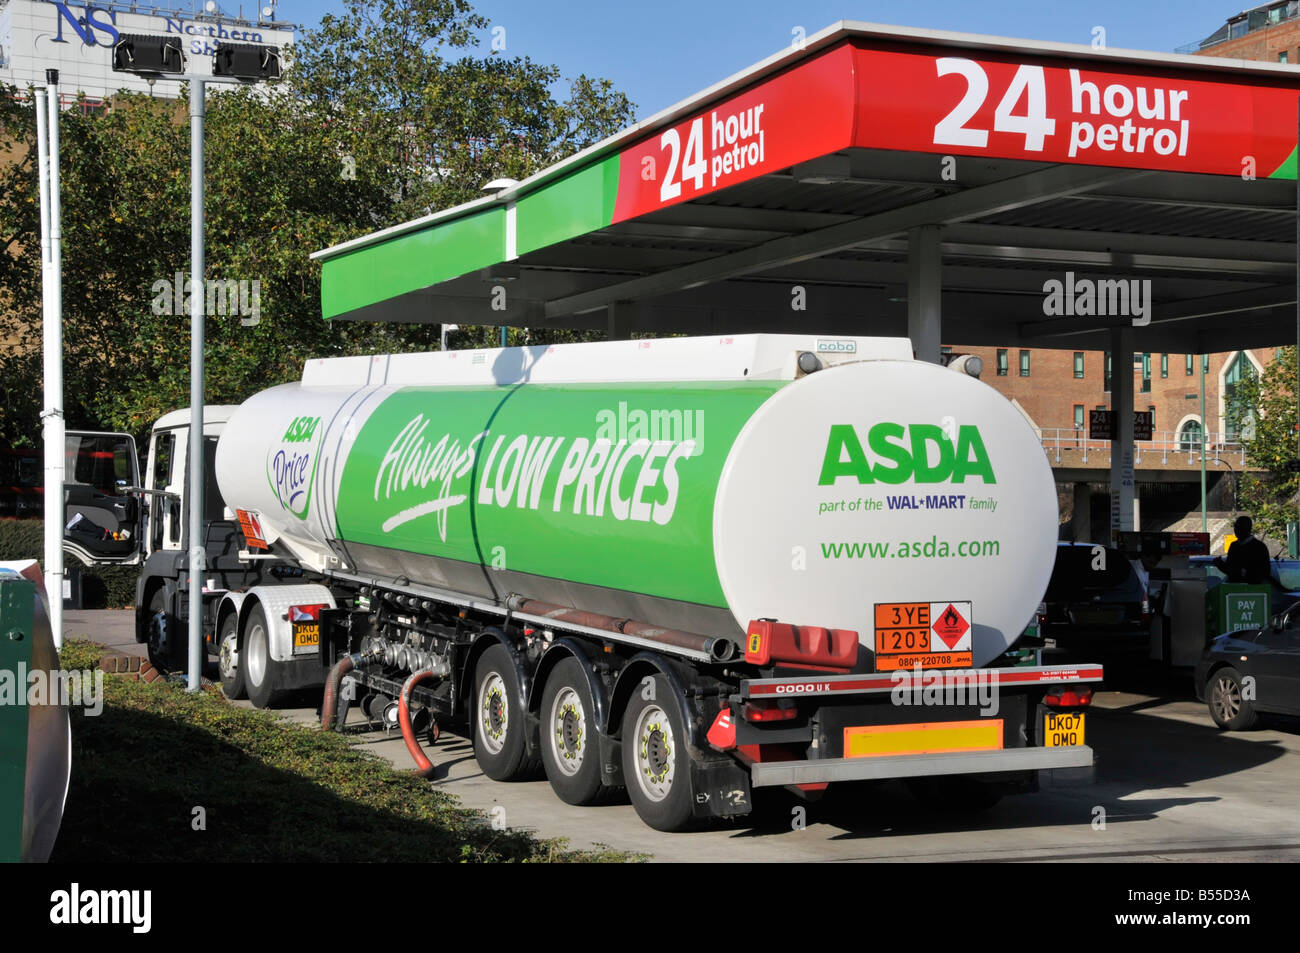 Asda supermarket  24 hour petrol filling station hgv lorry truck & articulated delivery tanker trailer unloading to forecourt Crossharbour London UK Stock Photo